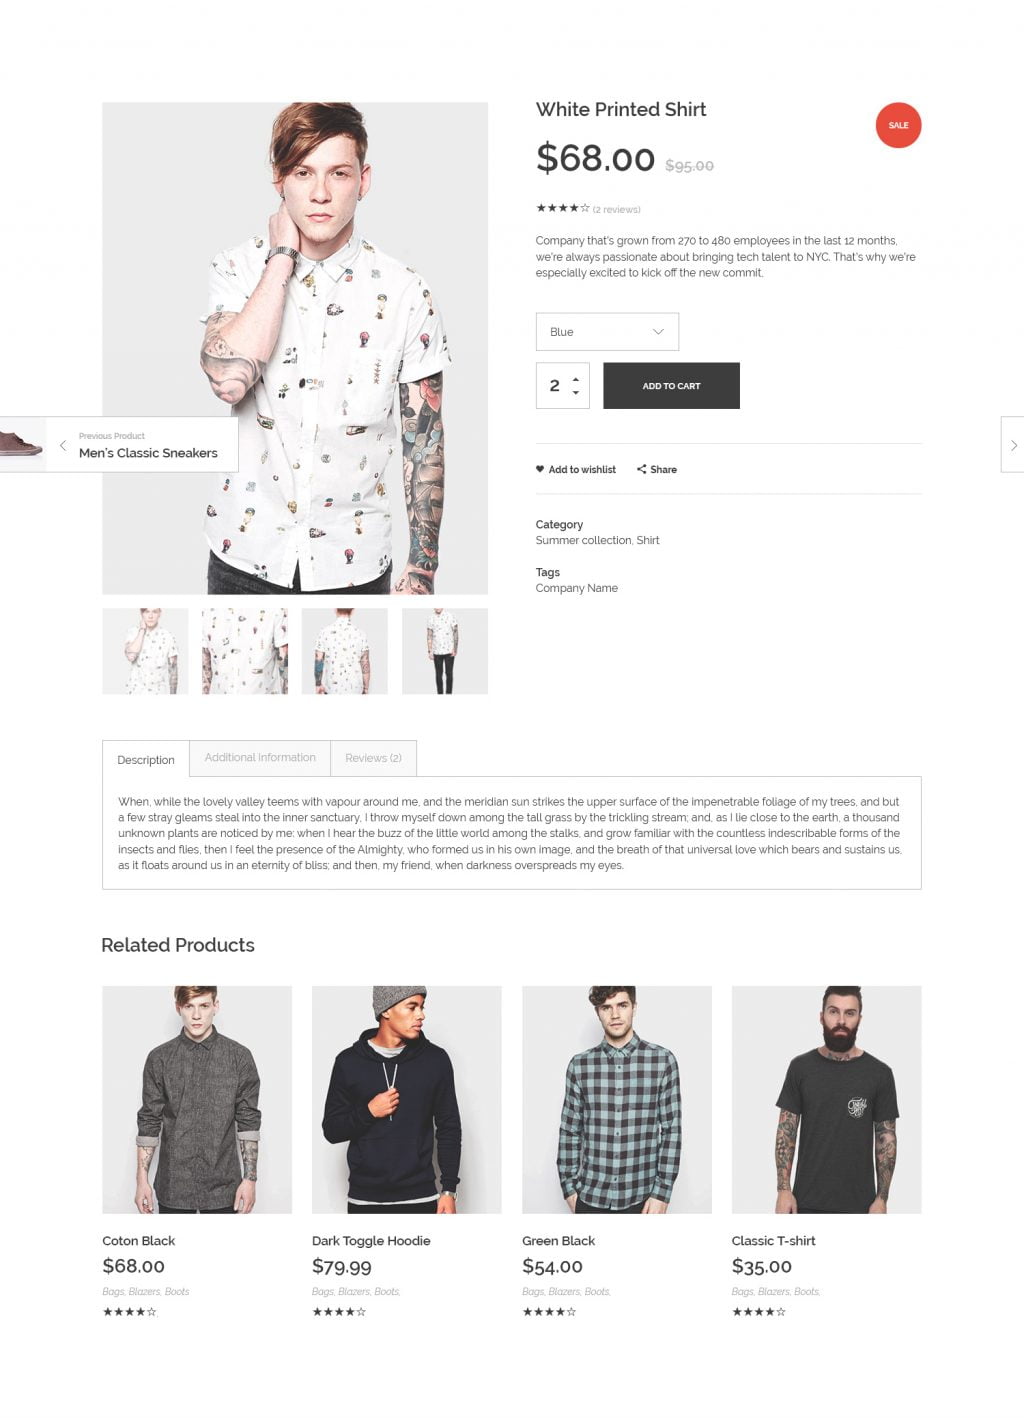 Single product page Example